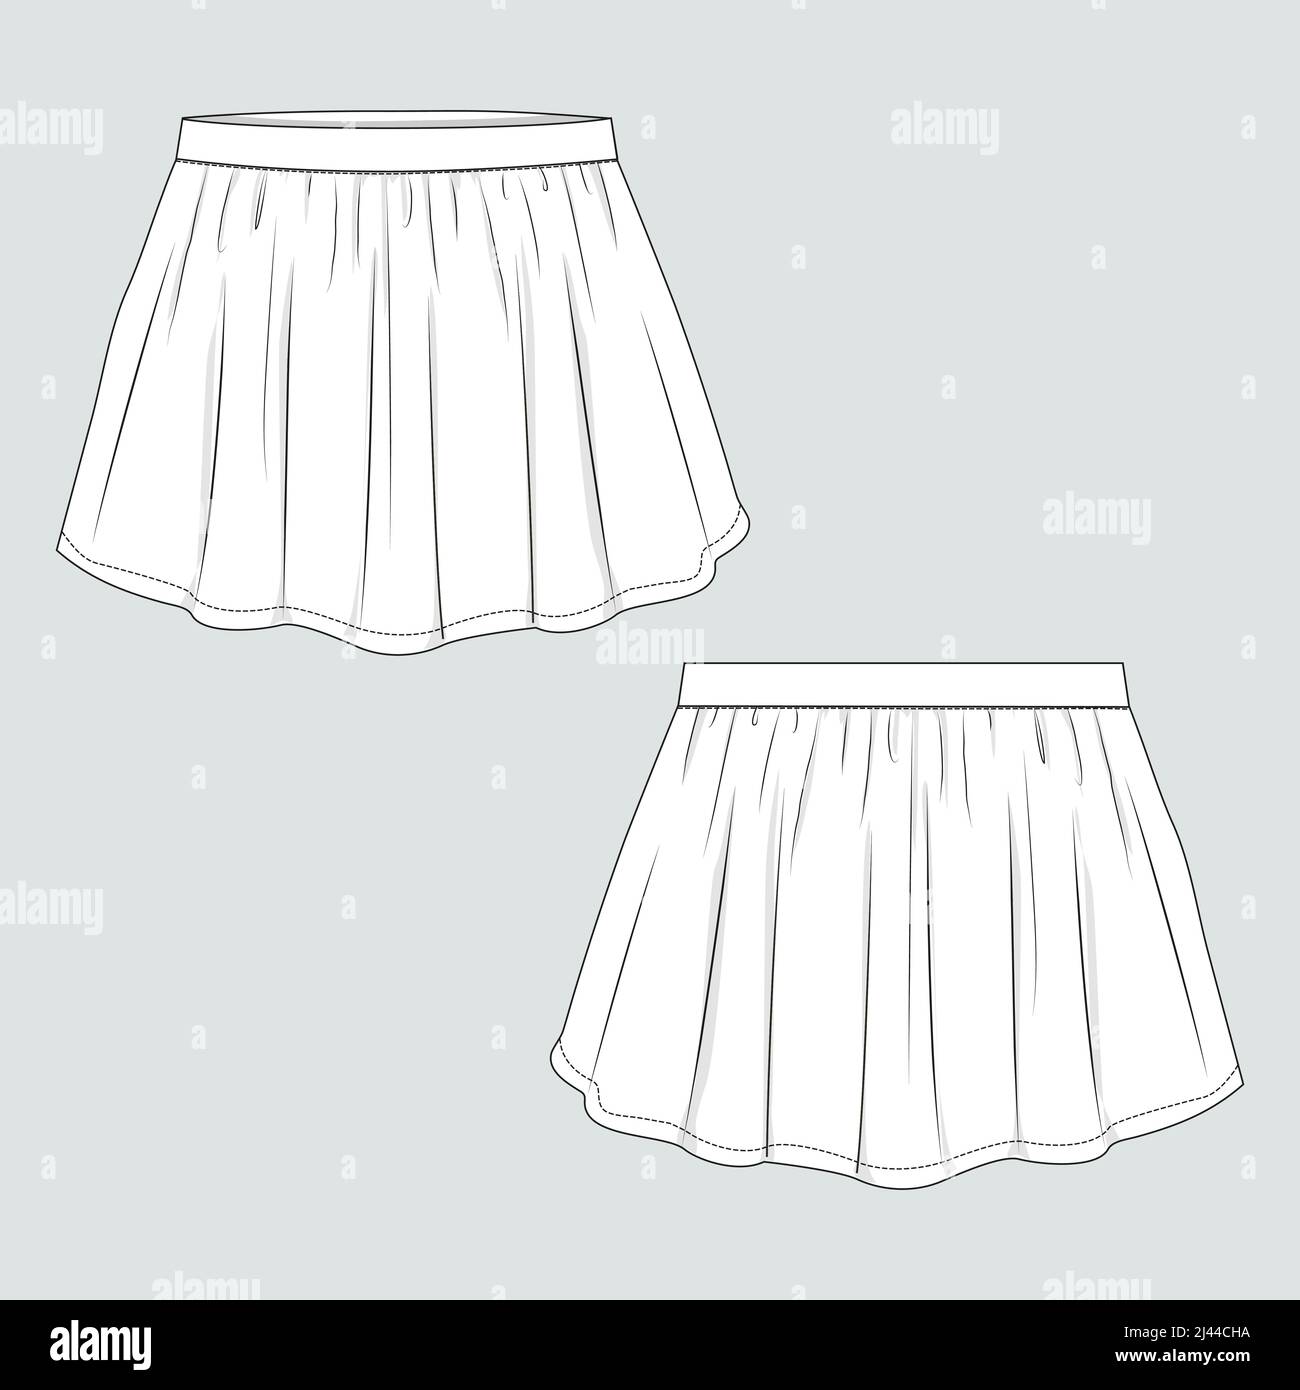 Skirt Illustrations and Clip Art 44183 Skirt royalty free illustrations  drawings and graphics available to search from thousands of vector EPS  clipart producers